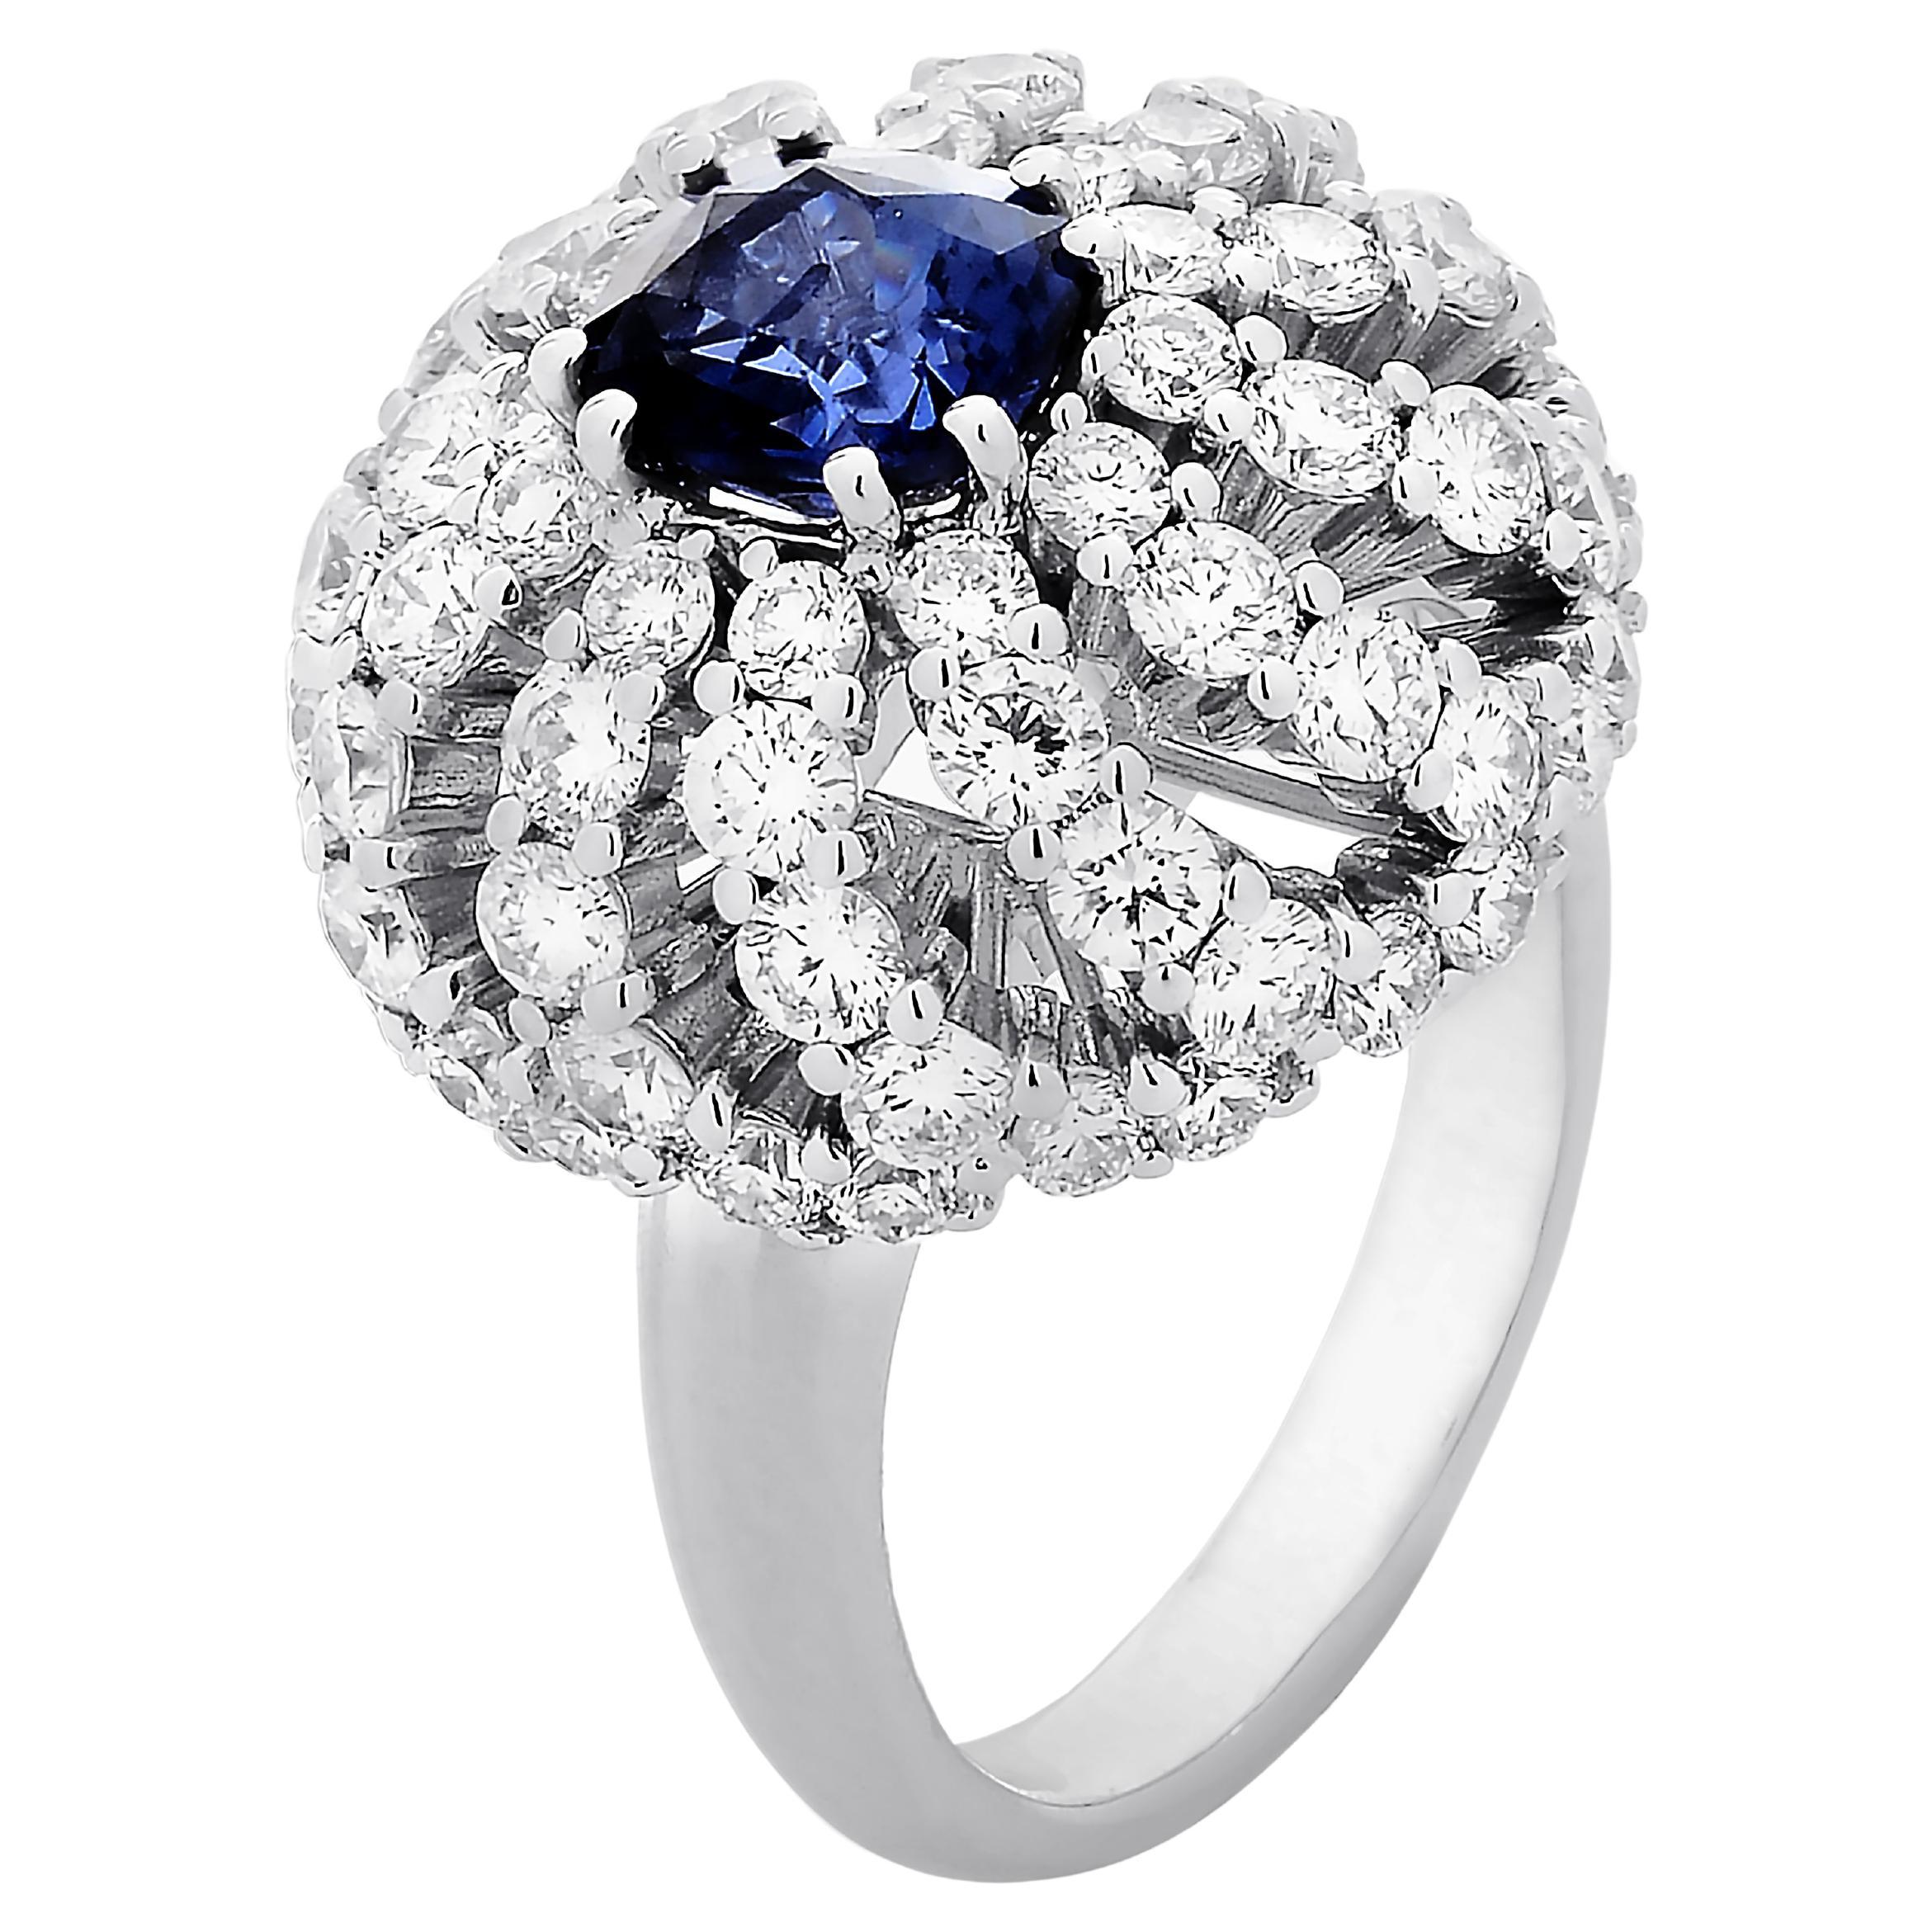 1.82 ct Natural Royal Blue Sapphire Ring with Diamonds 18k White Gold For Sale